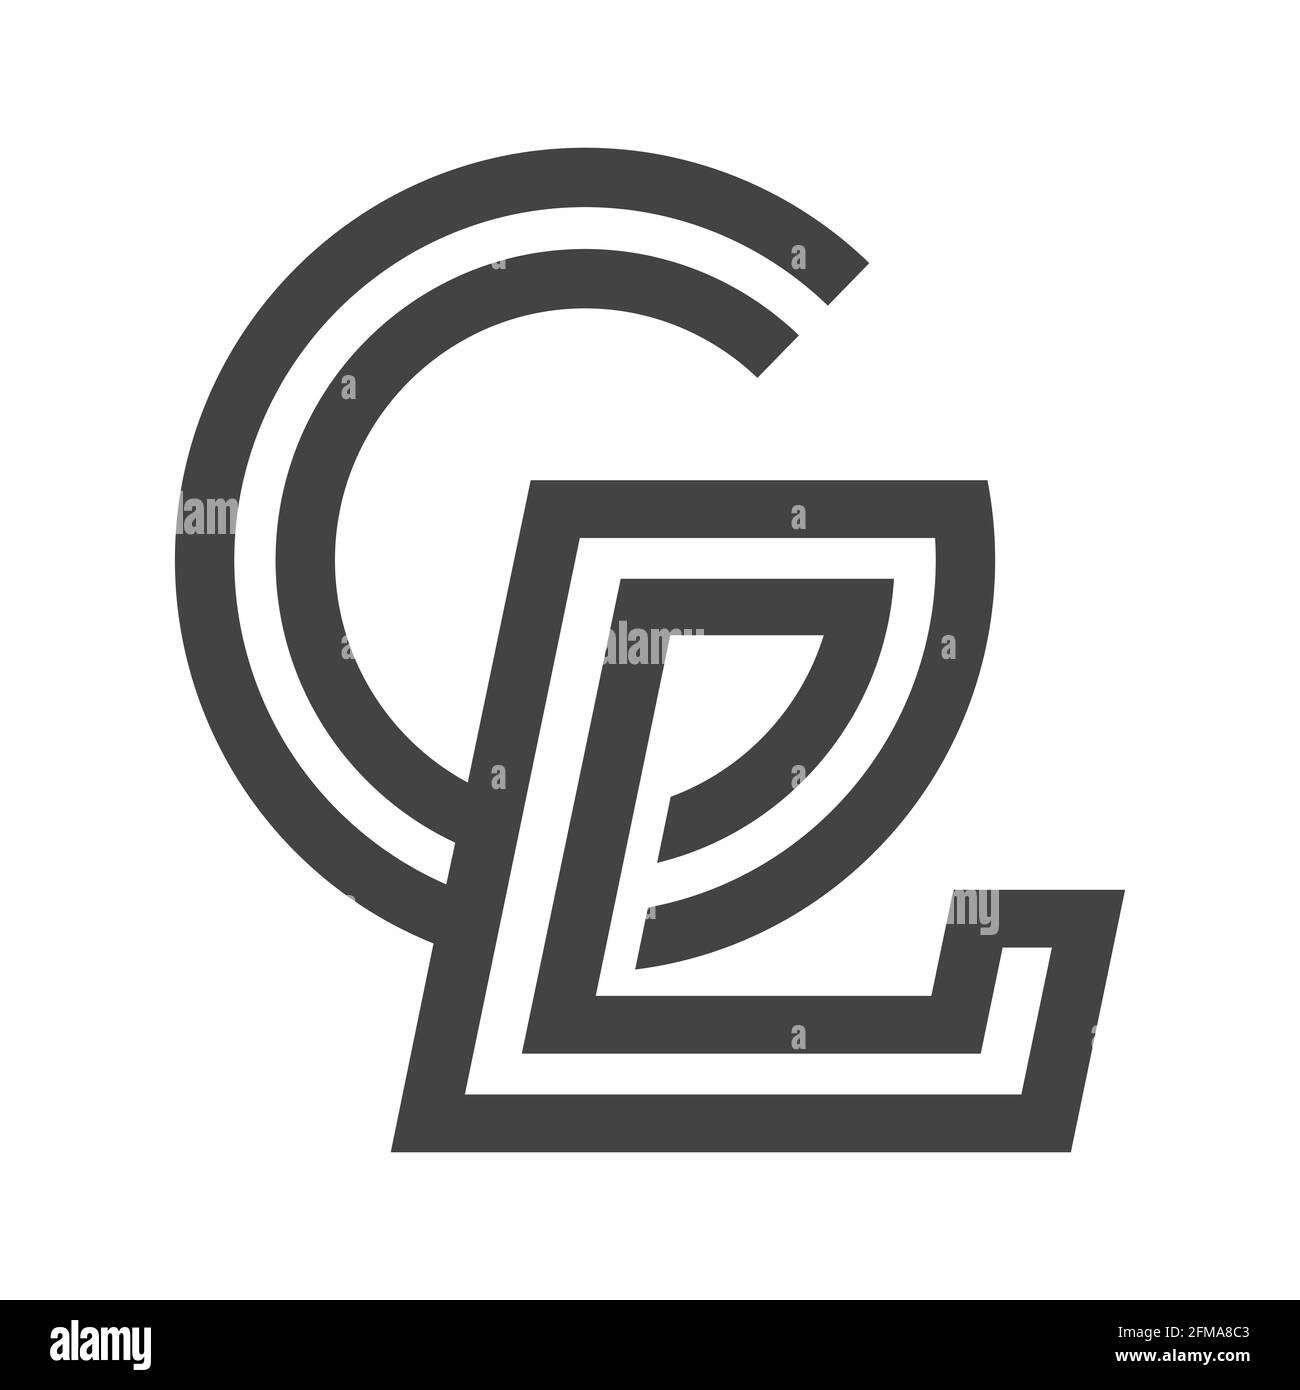 LG, GL, L, G abstract letters logo monogram #AD , #abstract, #GL, #LG, # monogram, #logo